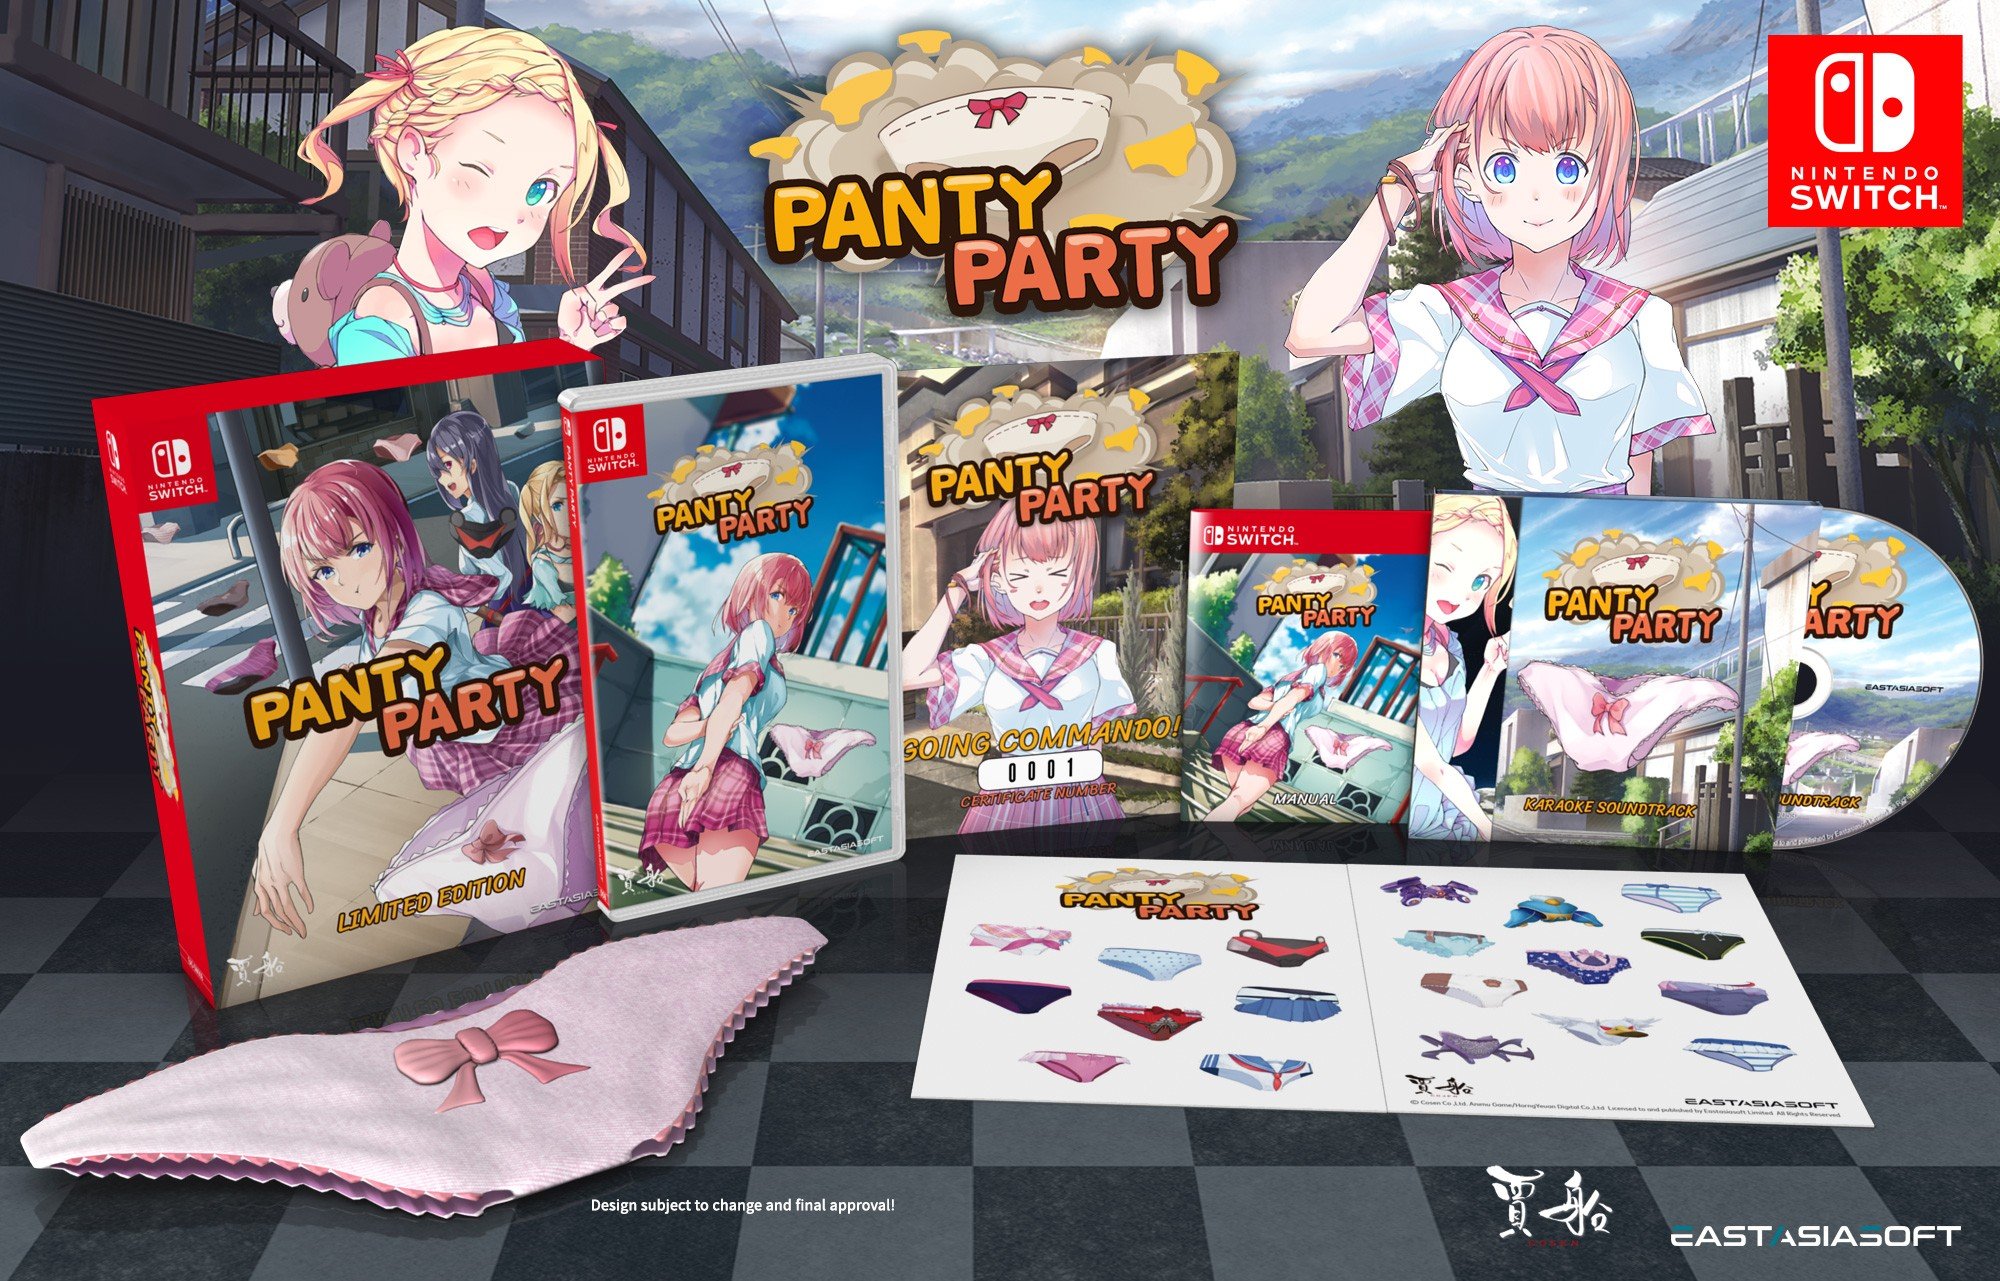 Panty Party for Switch limited run physical edition announced